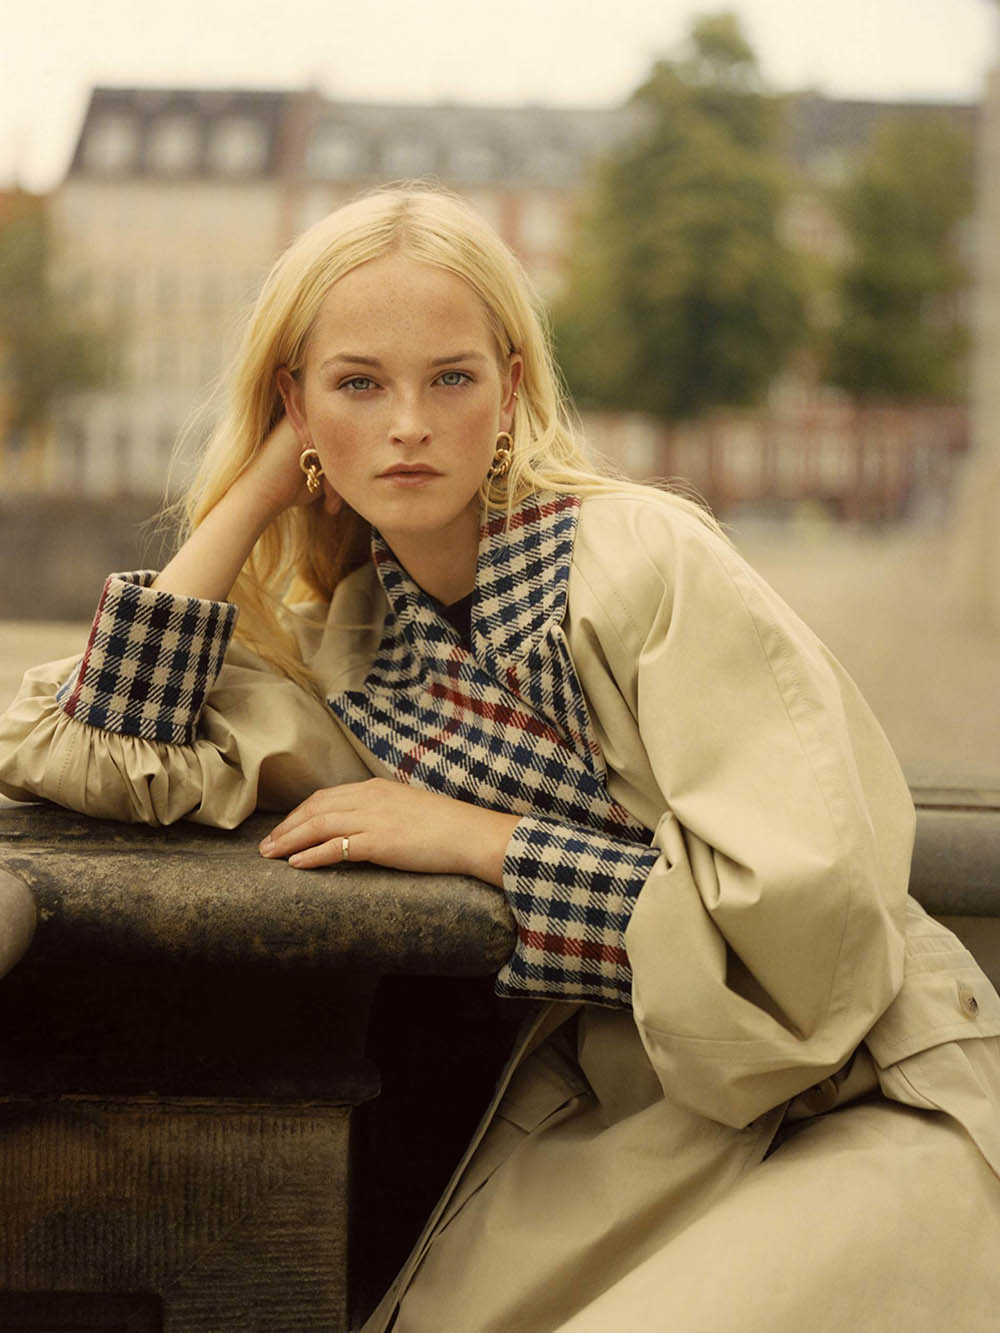 Jean Campbell covers Porter Edit September 27th, 2019 by Quentin De Briey